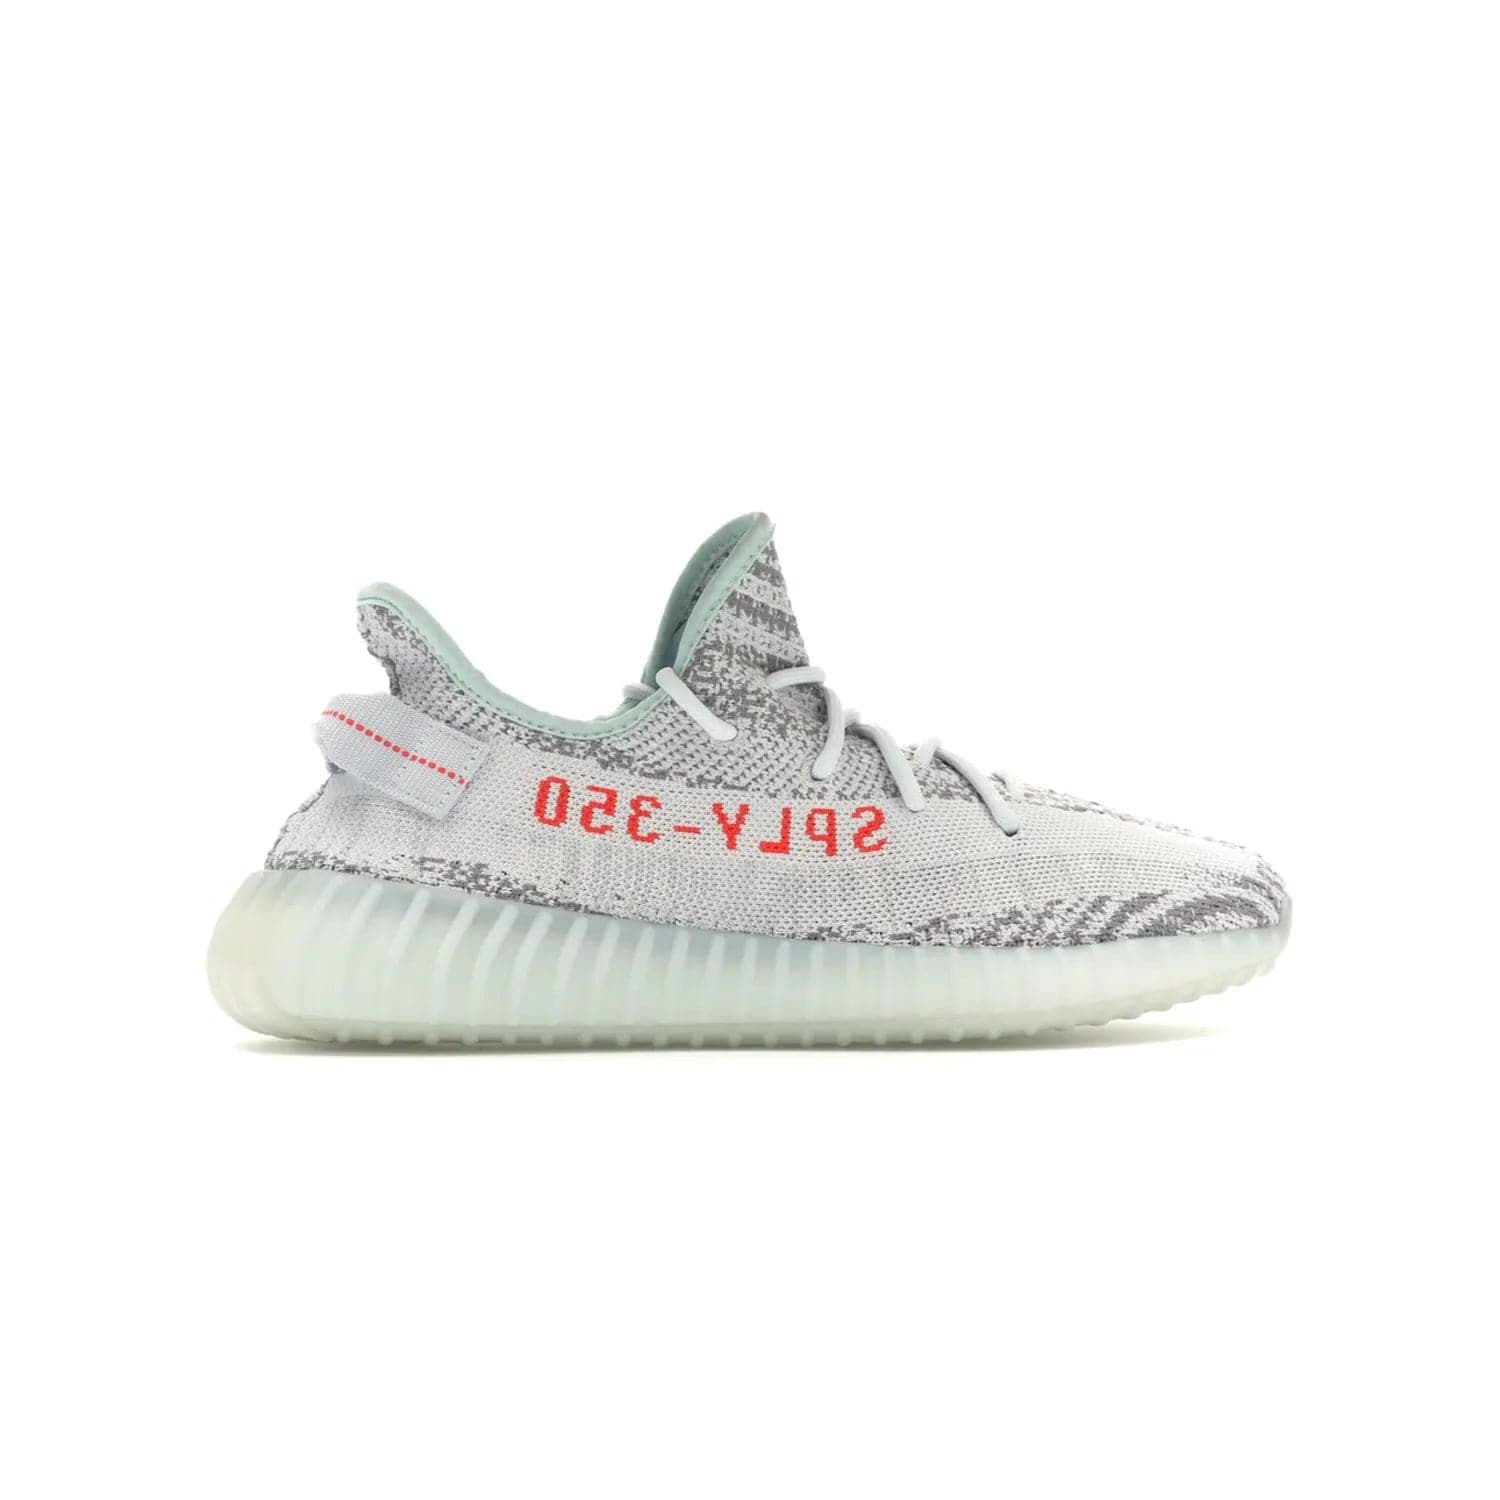 adidas Yeezy Boost 350 V2 Blue Tint - Image 36 - Only at www.BallersClubKickz.com - The adidas Yeezy Boost 350 V2 Blue Tint merges fashion and functionality with its Primeknit upper and Boost sole. Released in December 2017, this luxurious sneaker is perfect for making a stylish statement.